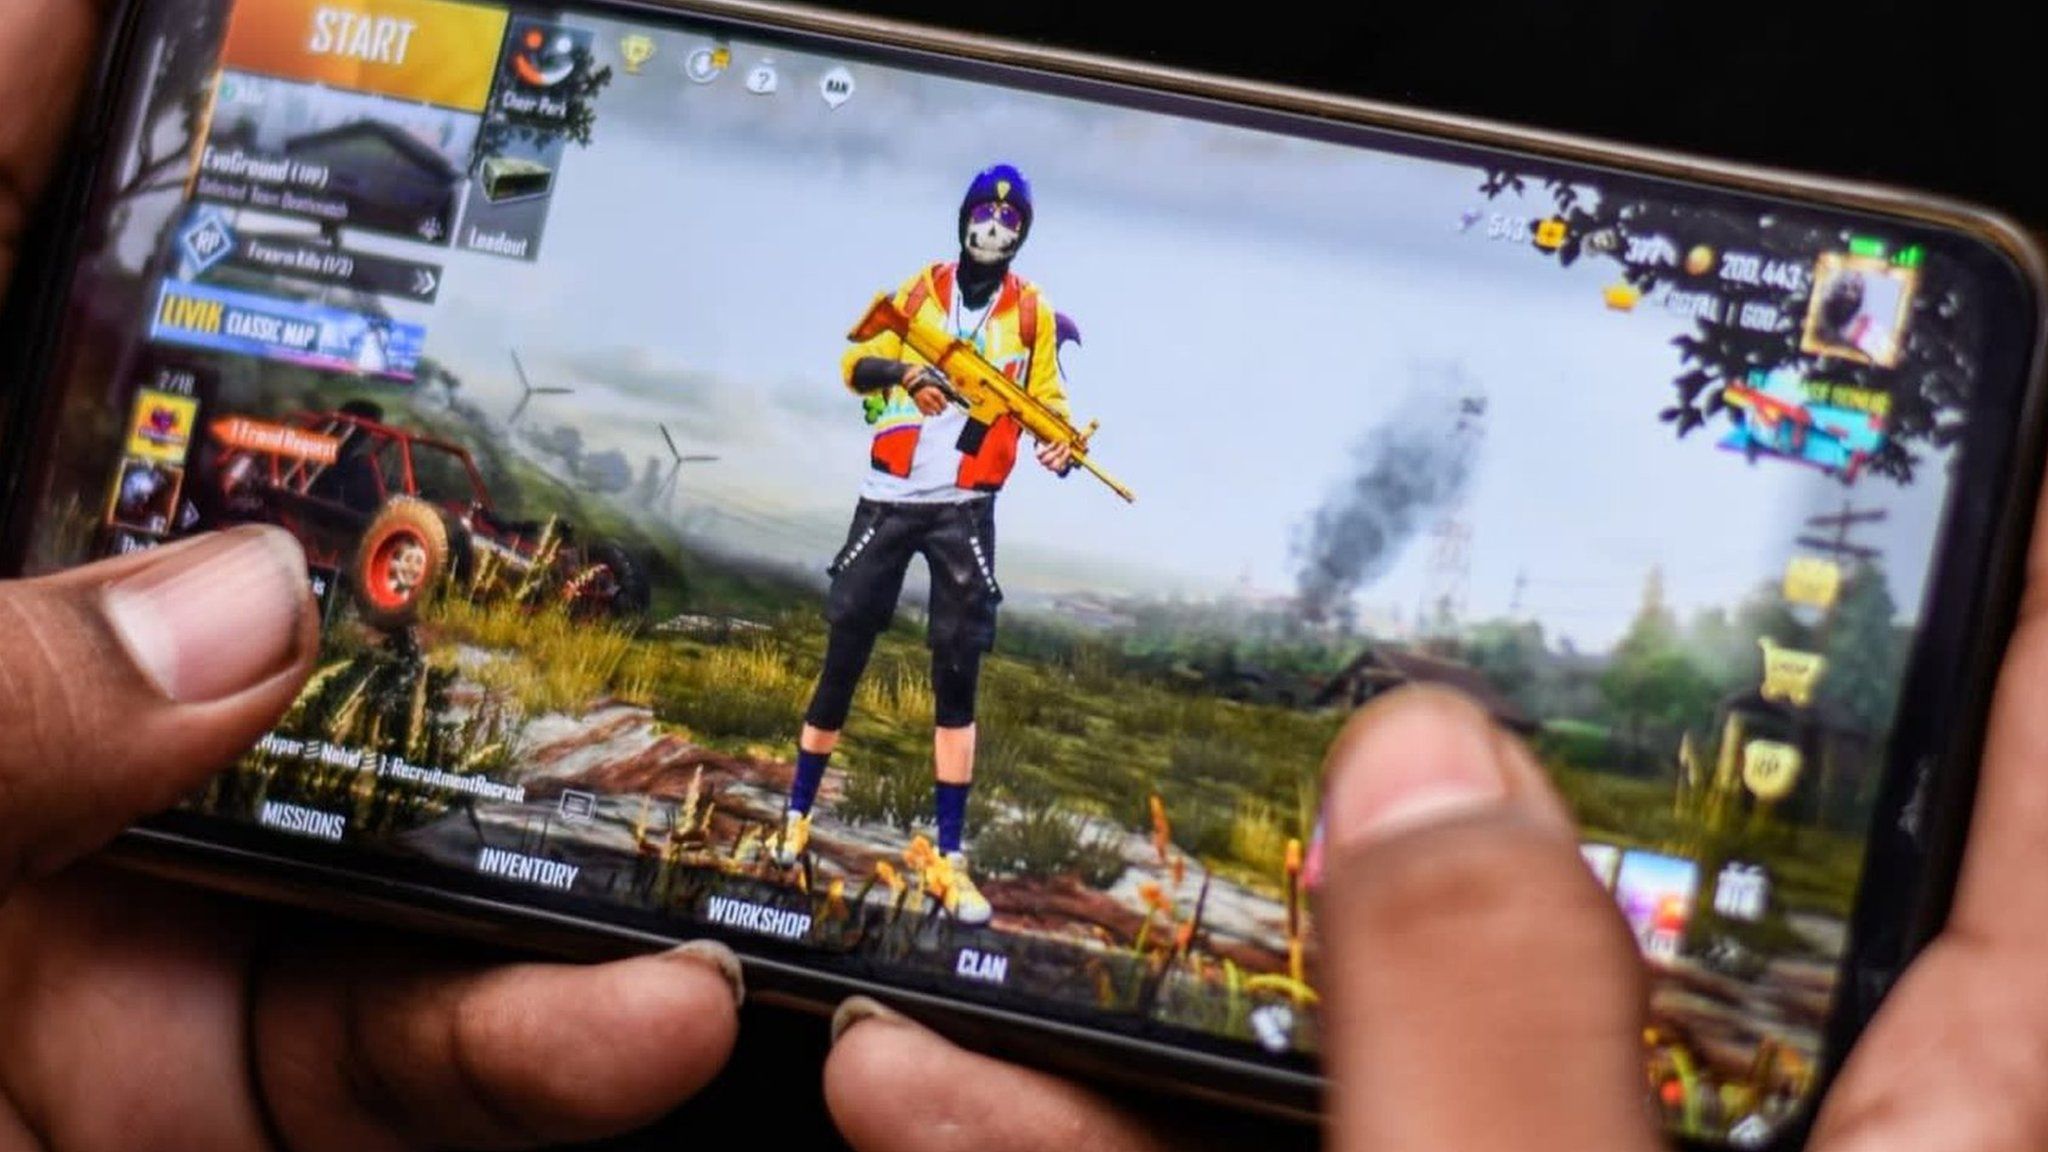 PUBG was banned in India amid security concerns.